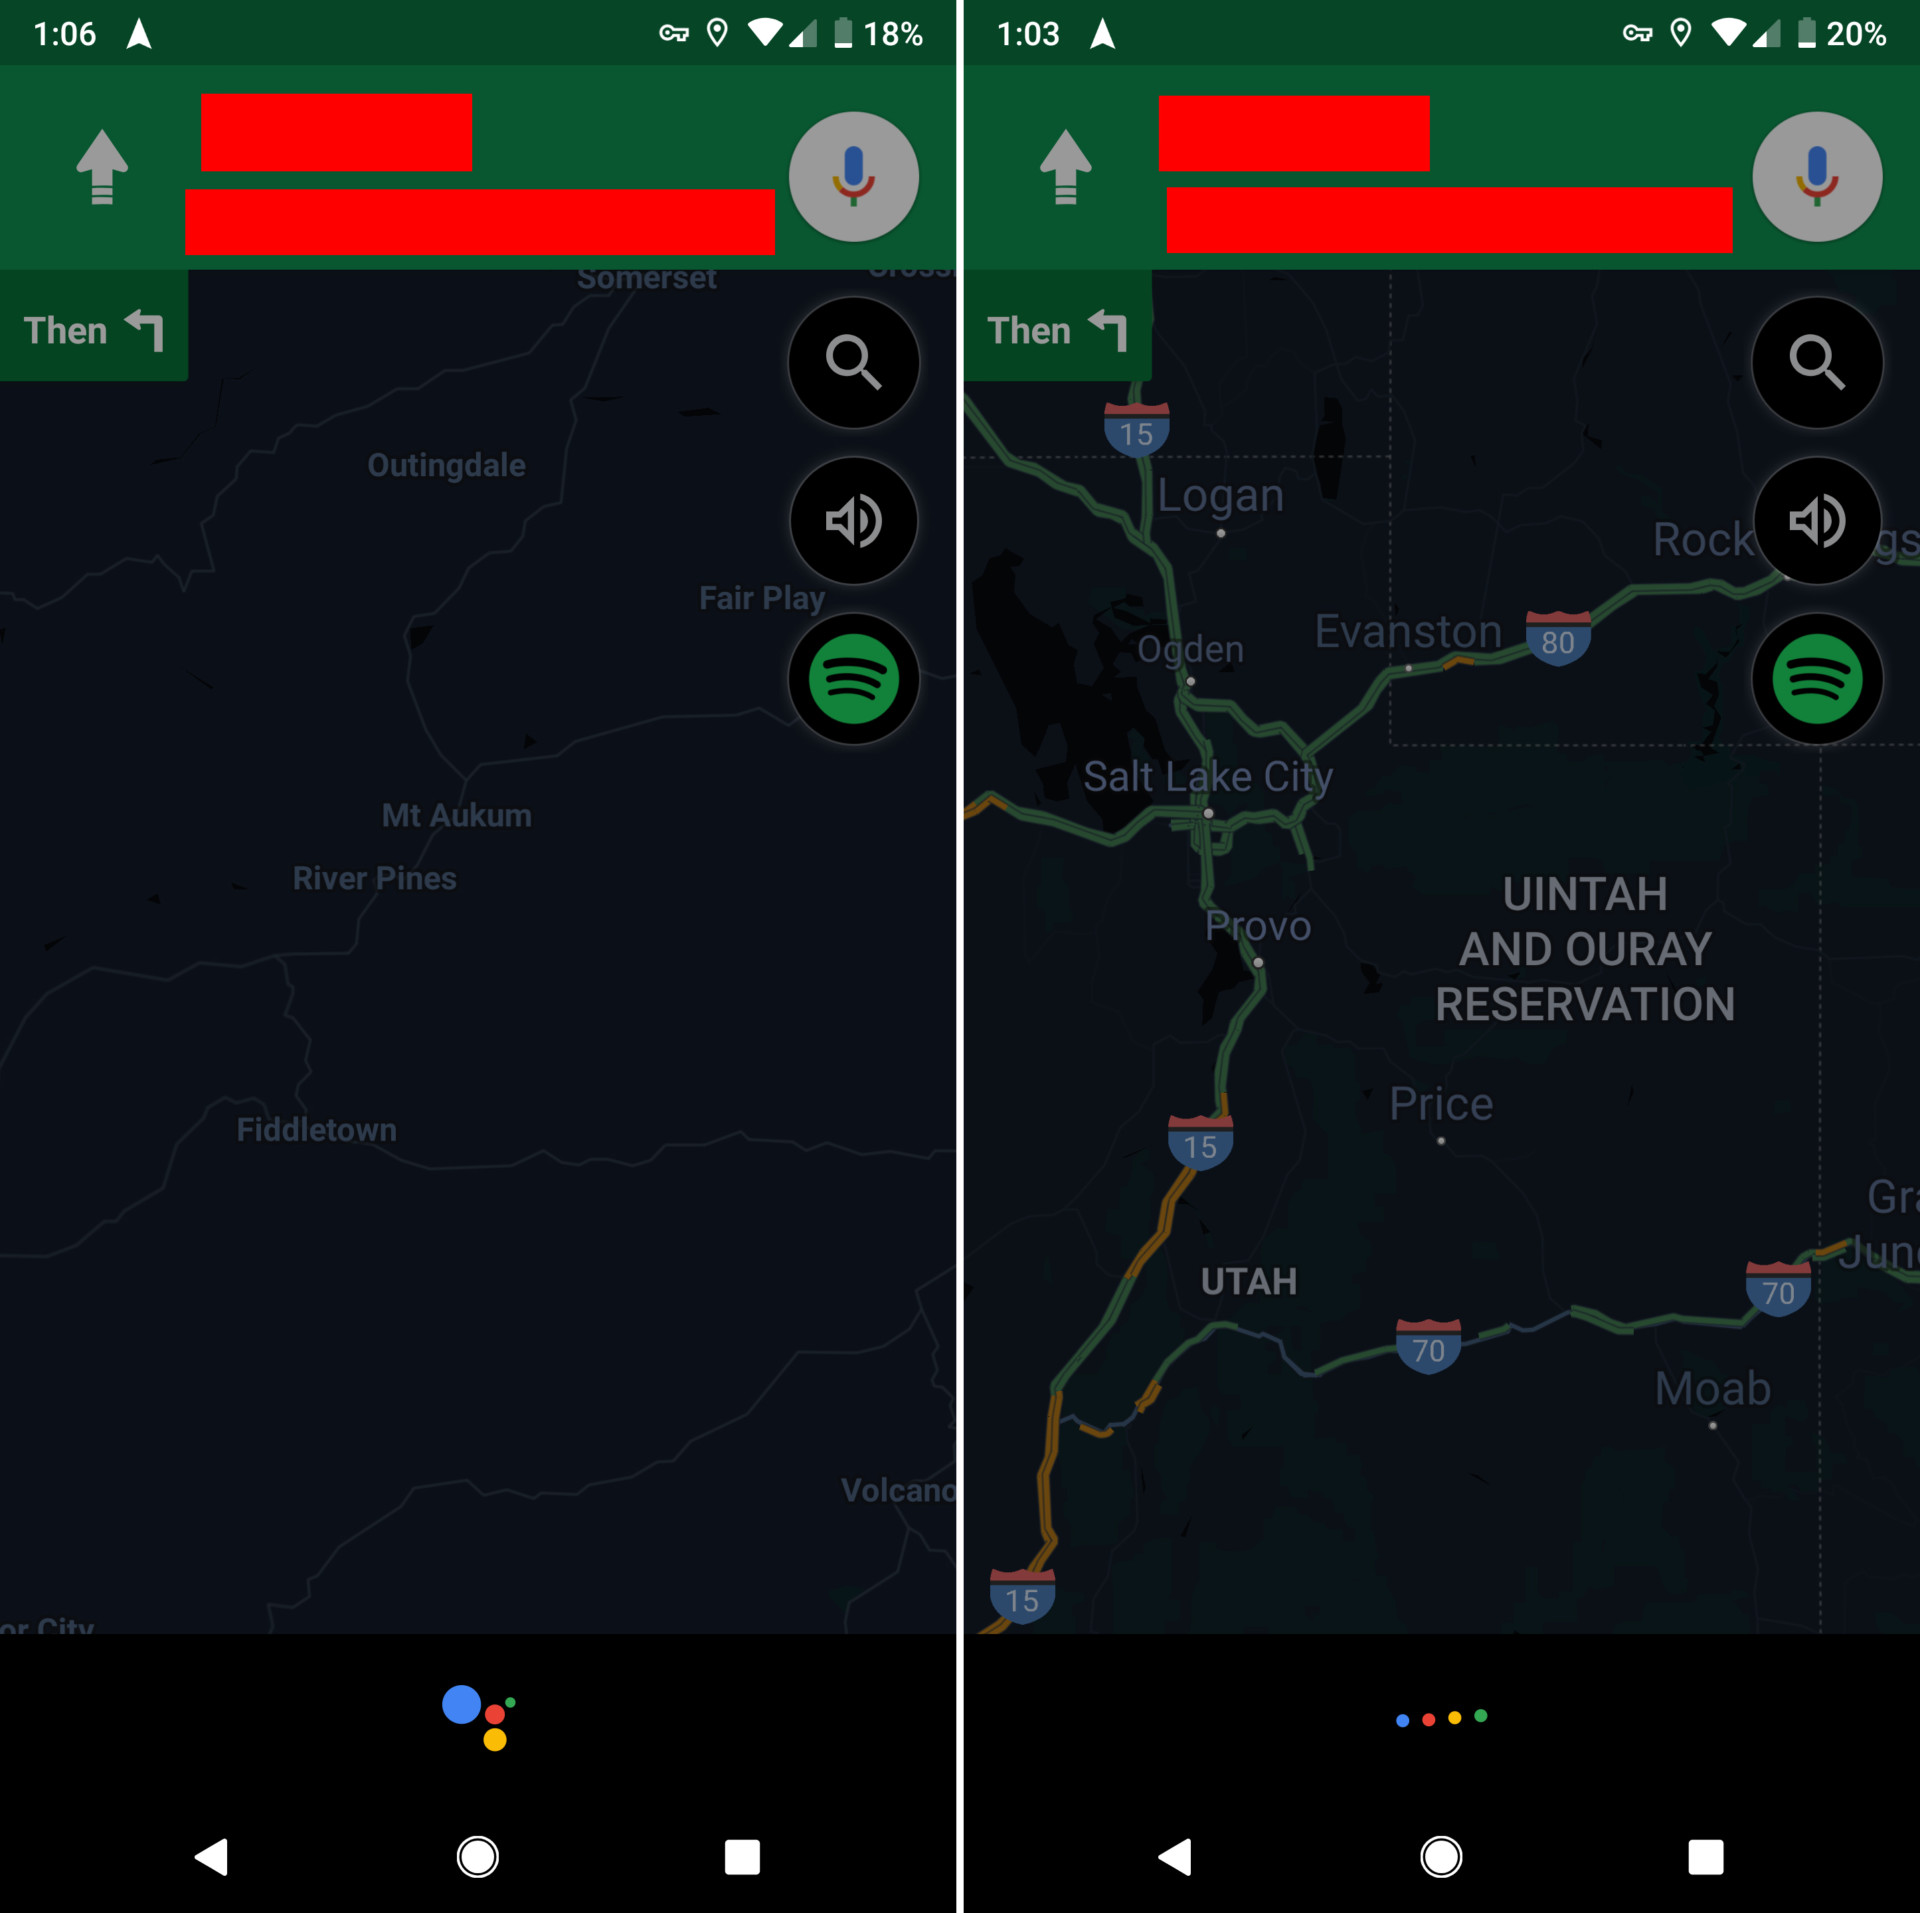 Google Maps screenshots featuring the new Google Assistant